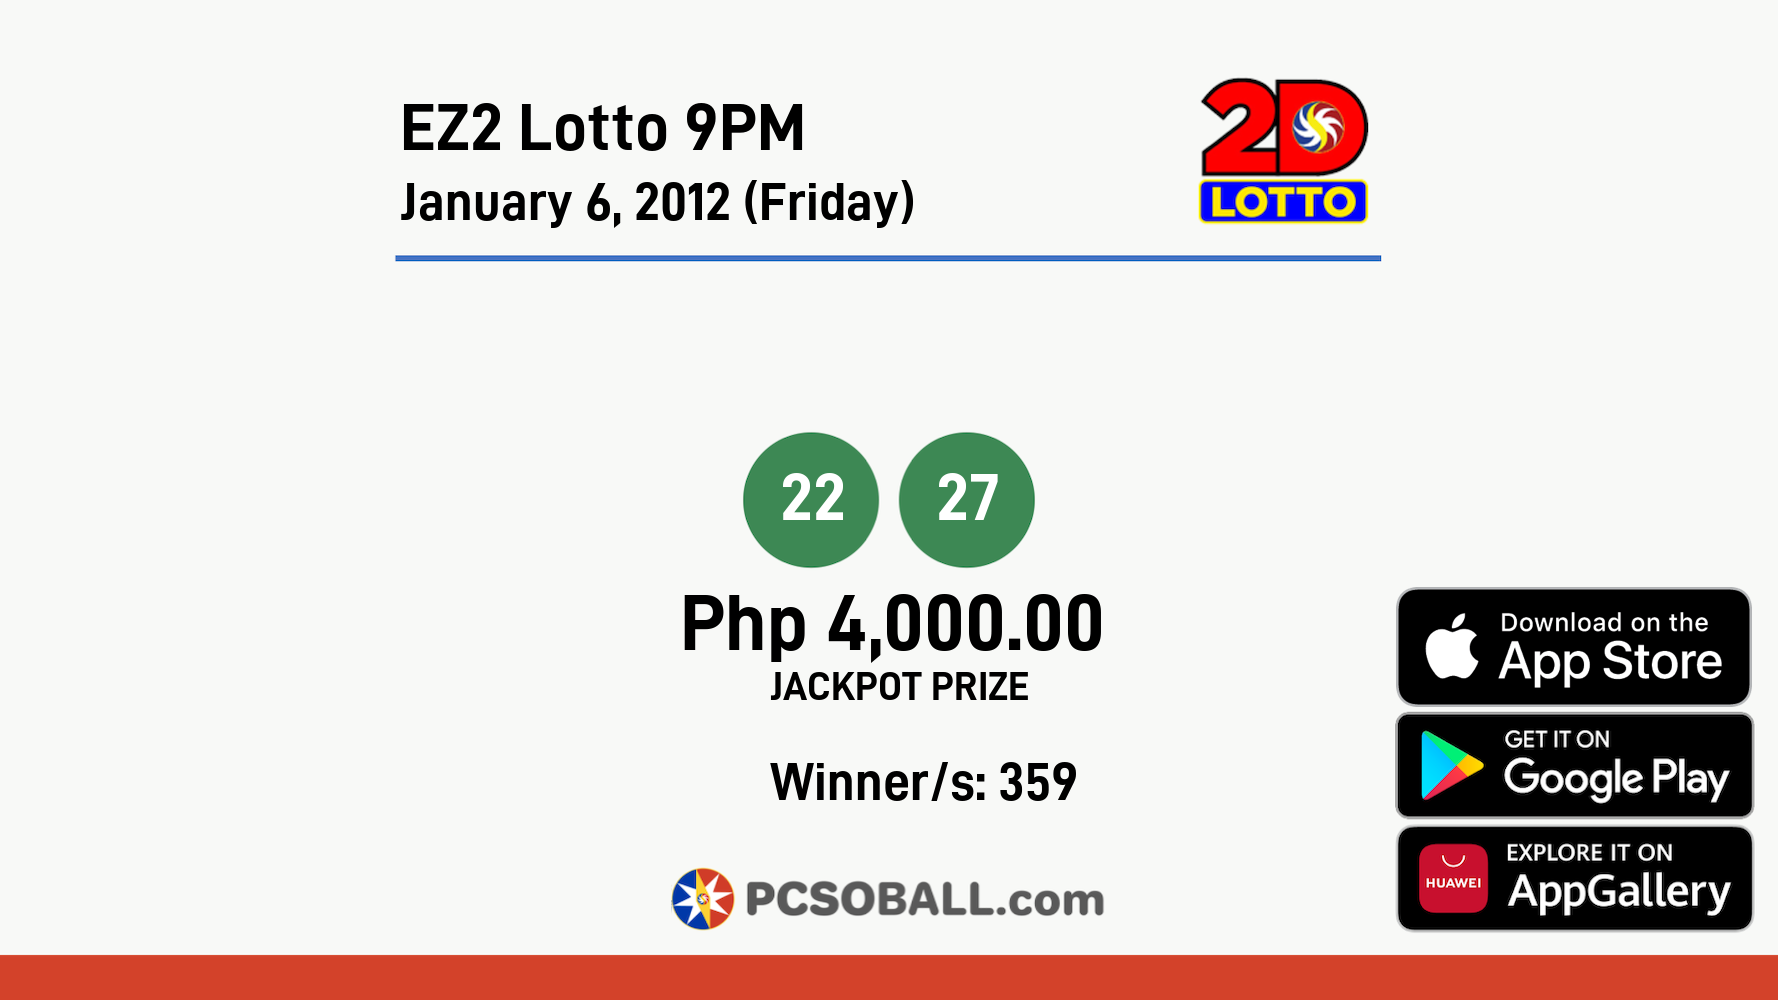 EZ2 Lotto 9PM January 6, 2012 (Friday) Result